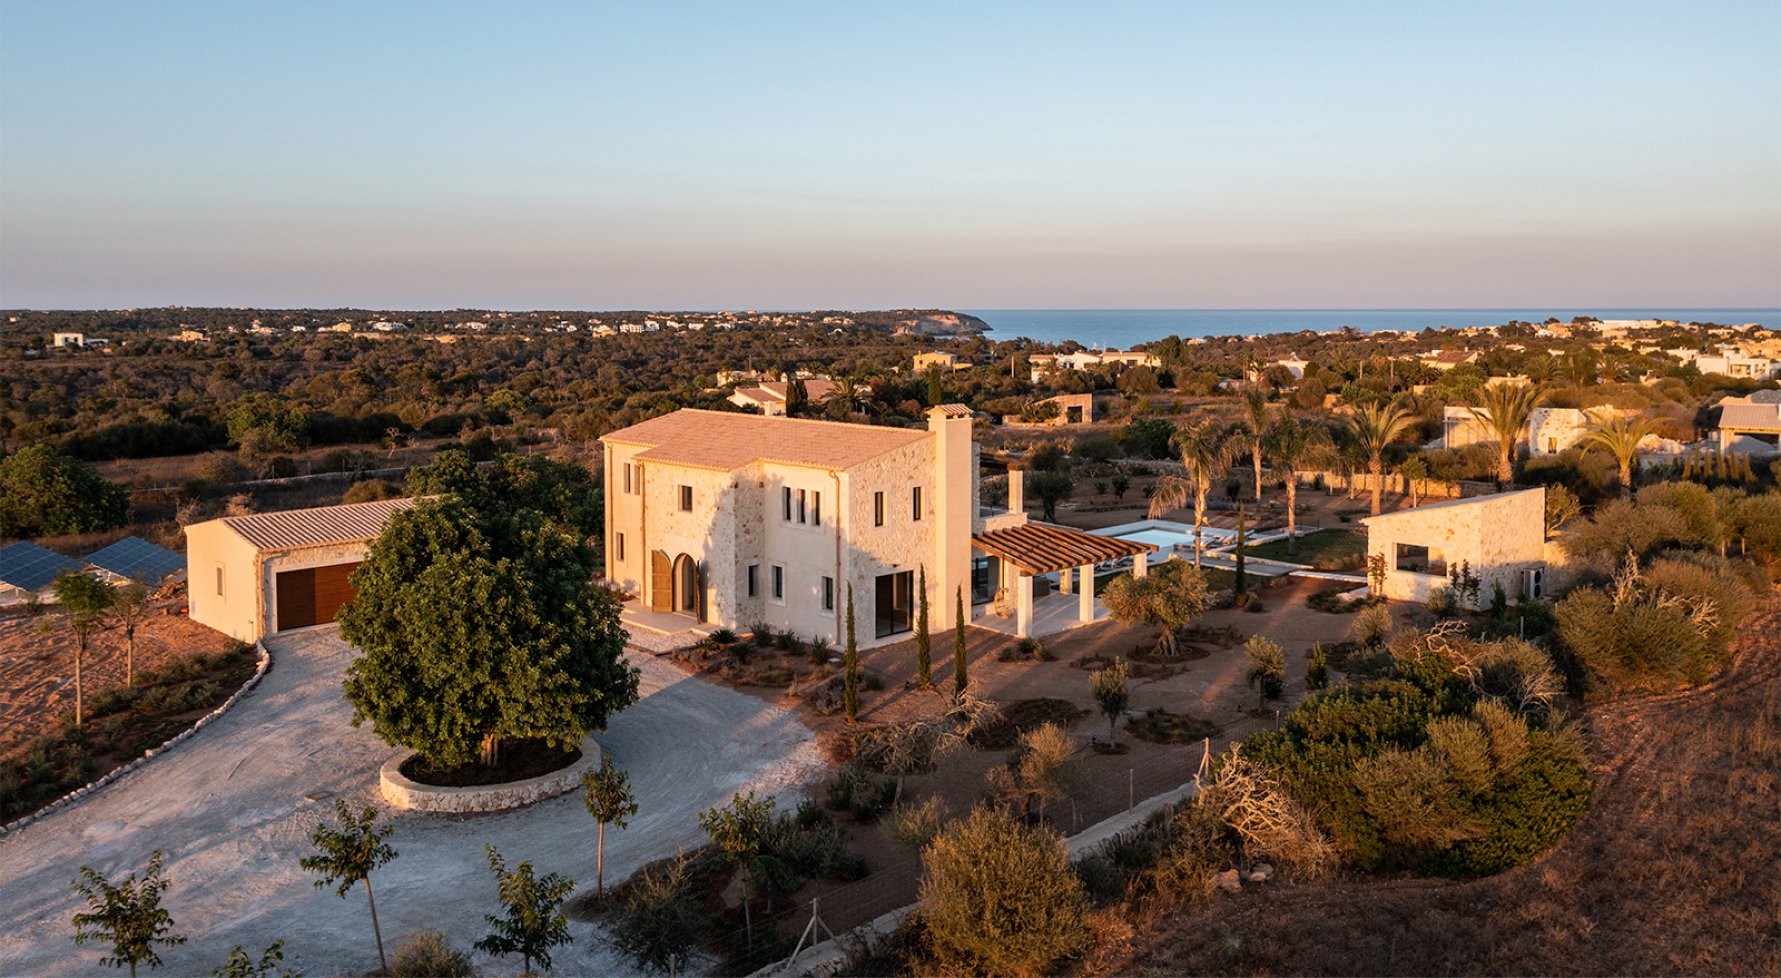 Property in 07690 Mallorca - Cala Llombards: Beautiful newly built finca in Cala Llombards with large pool near the sea - picture 1